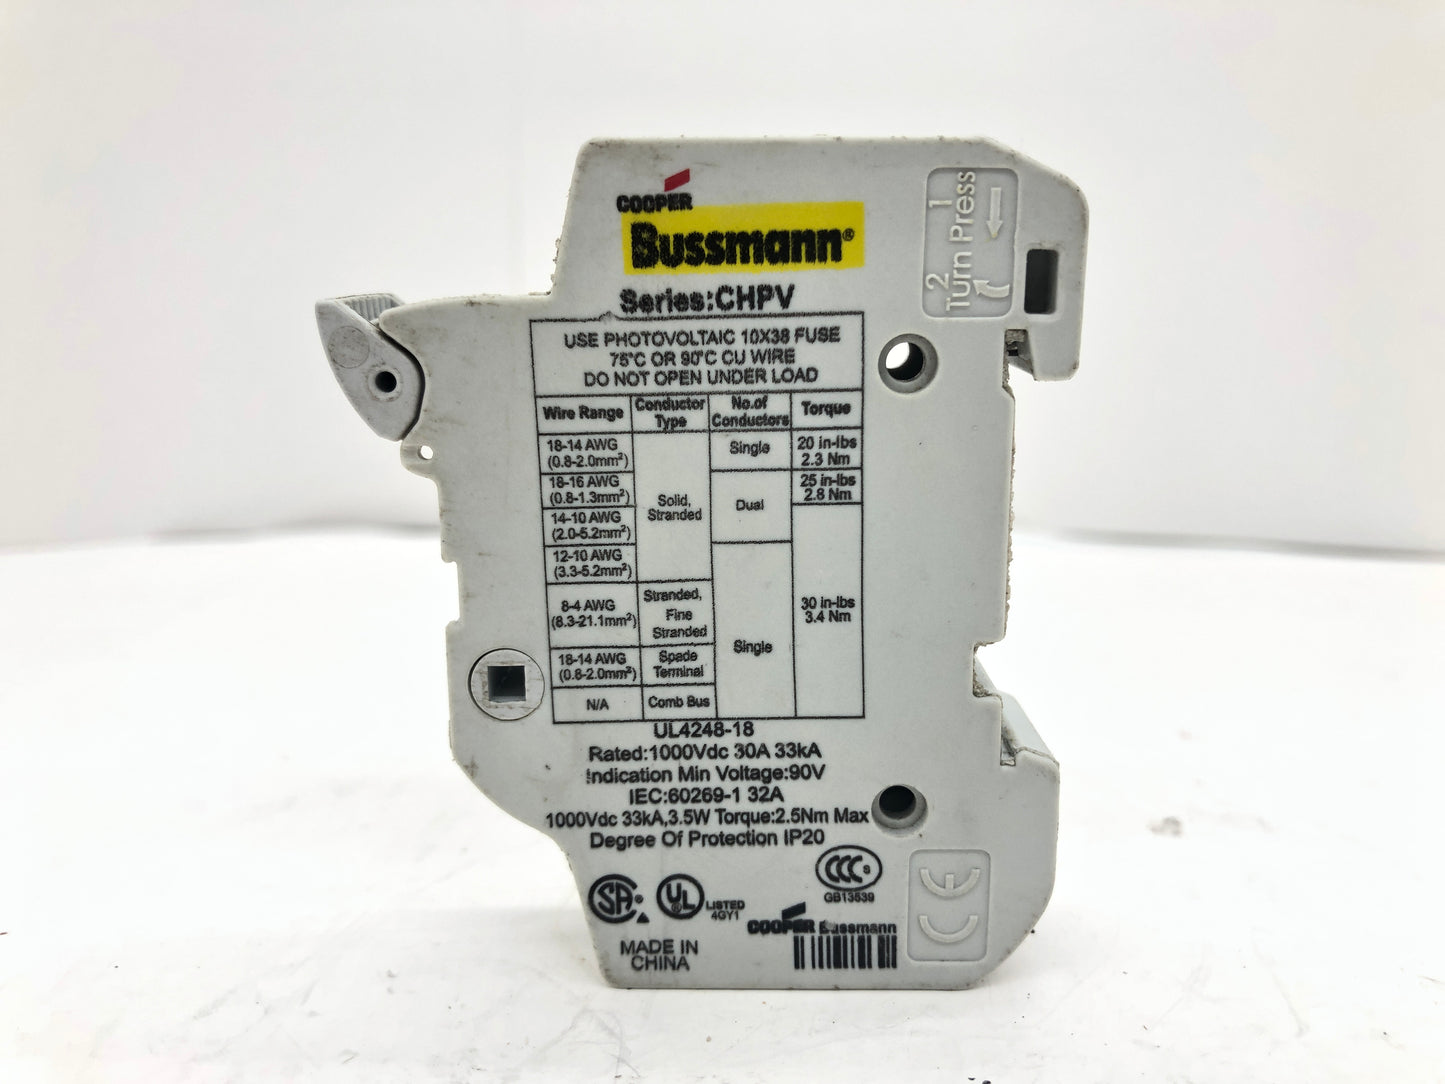 Bussmann CHPV1U Fuse Holder 1Pole 30A 1000Vdc Mfh for 10X38 Gpv - Reconditioned